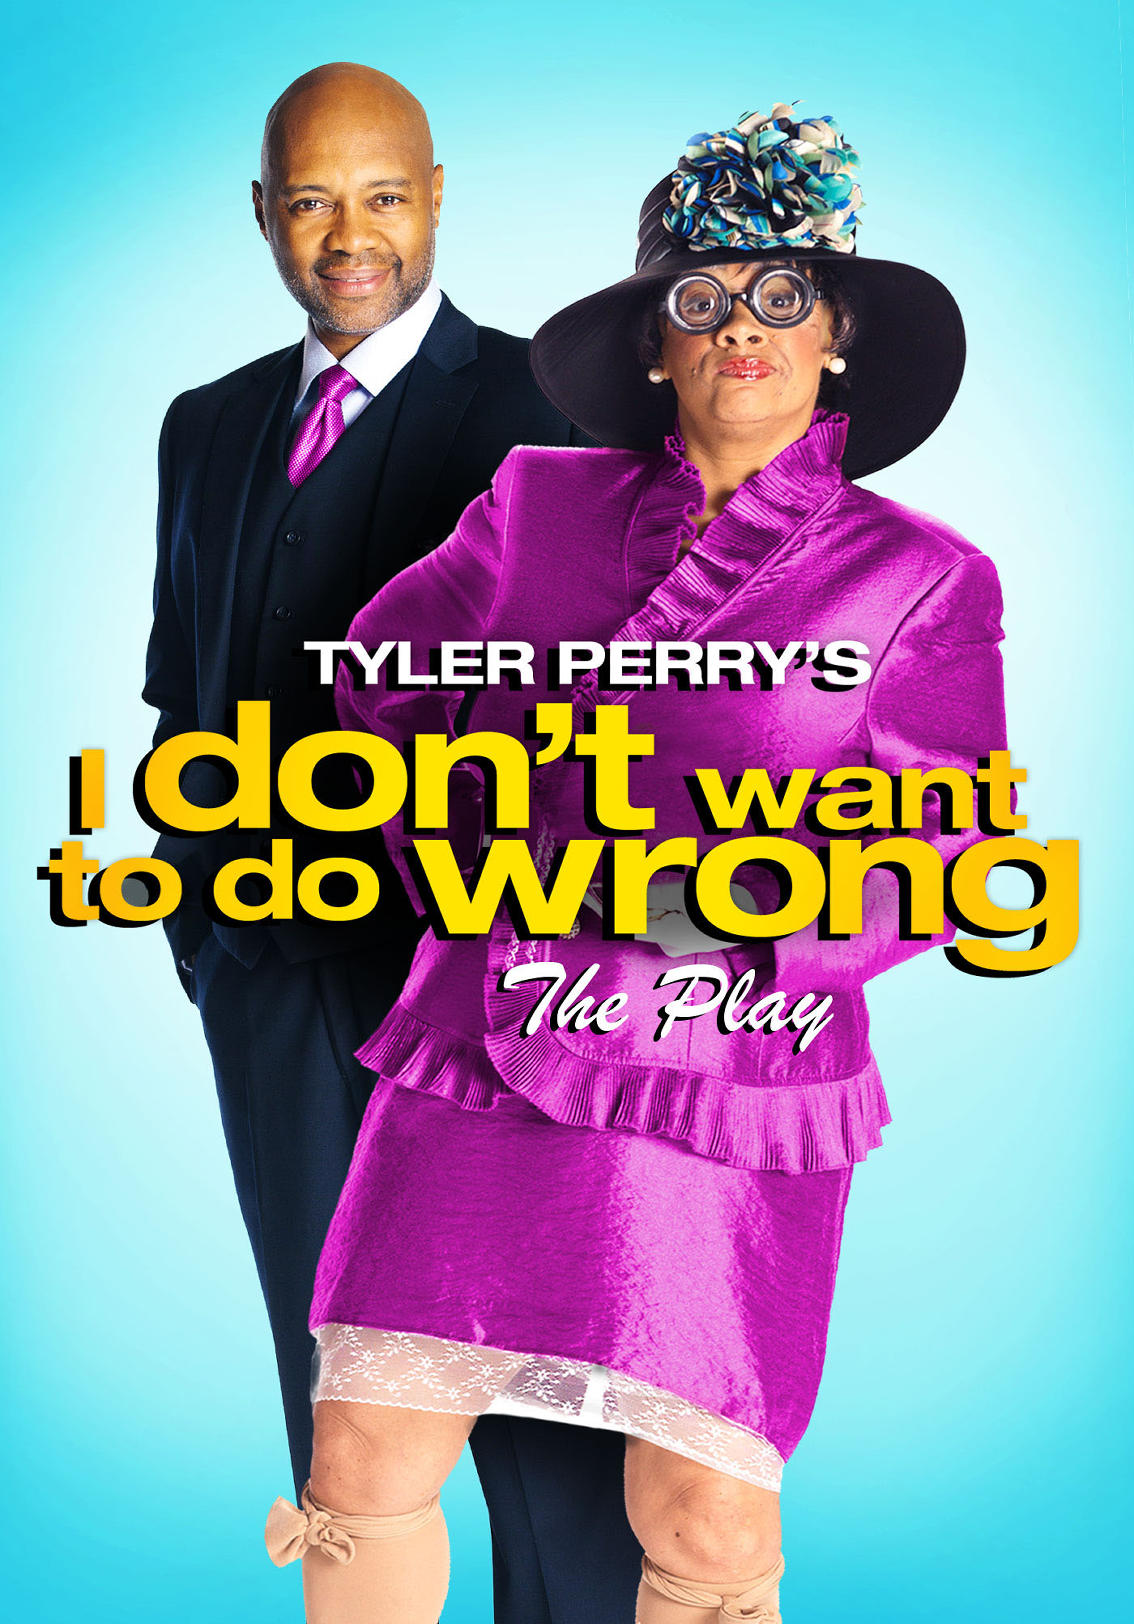 All tyler perry movies and plays - forkidsprof